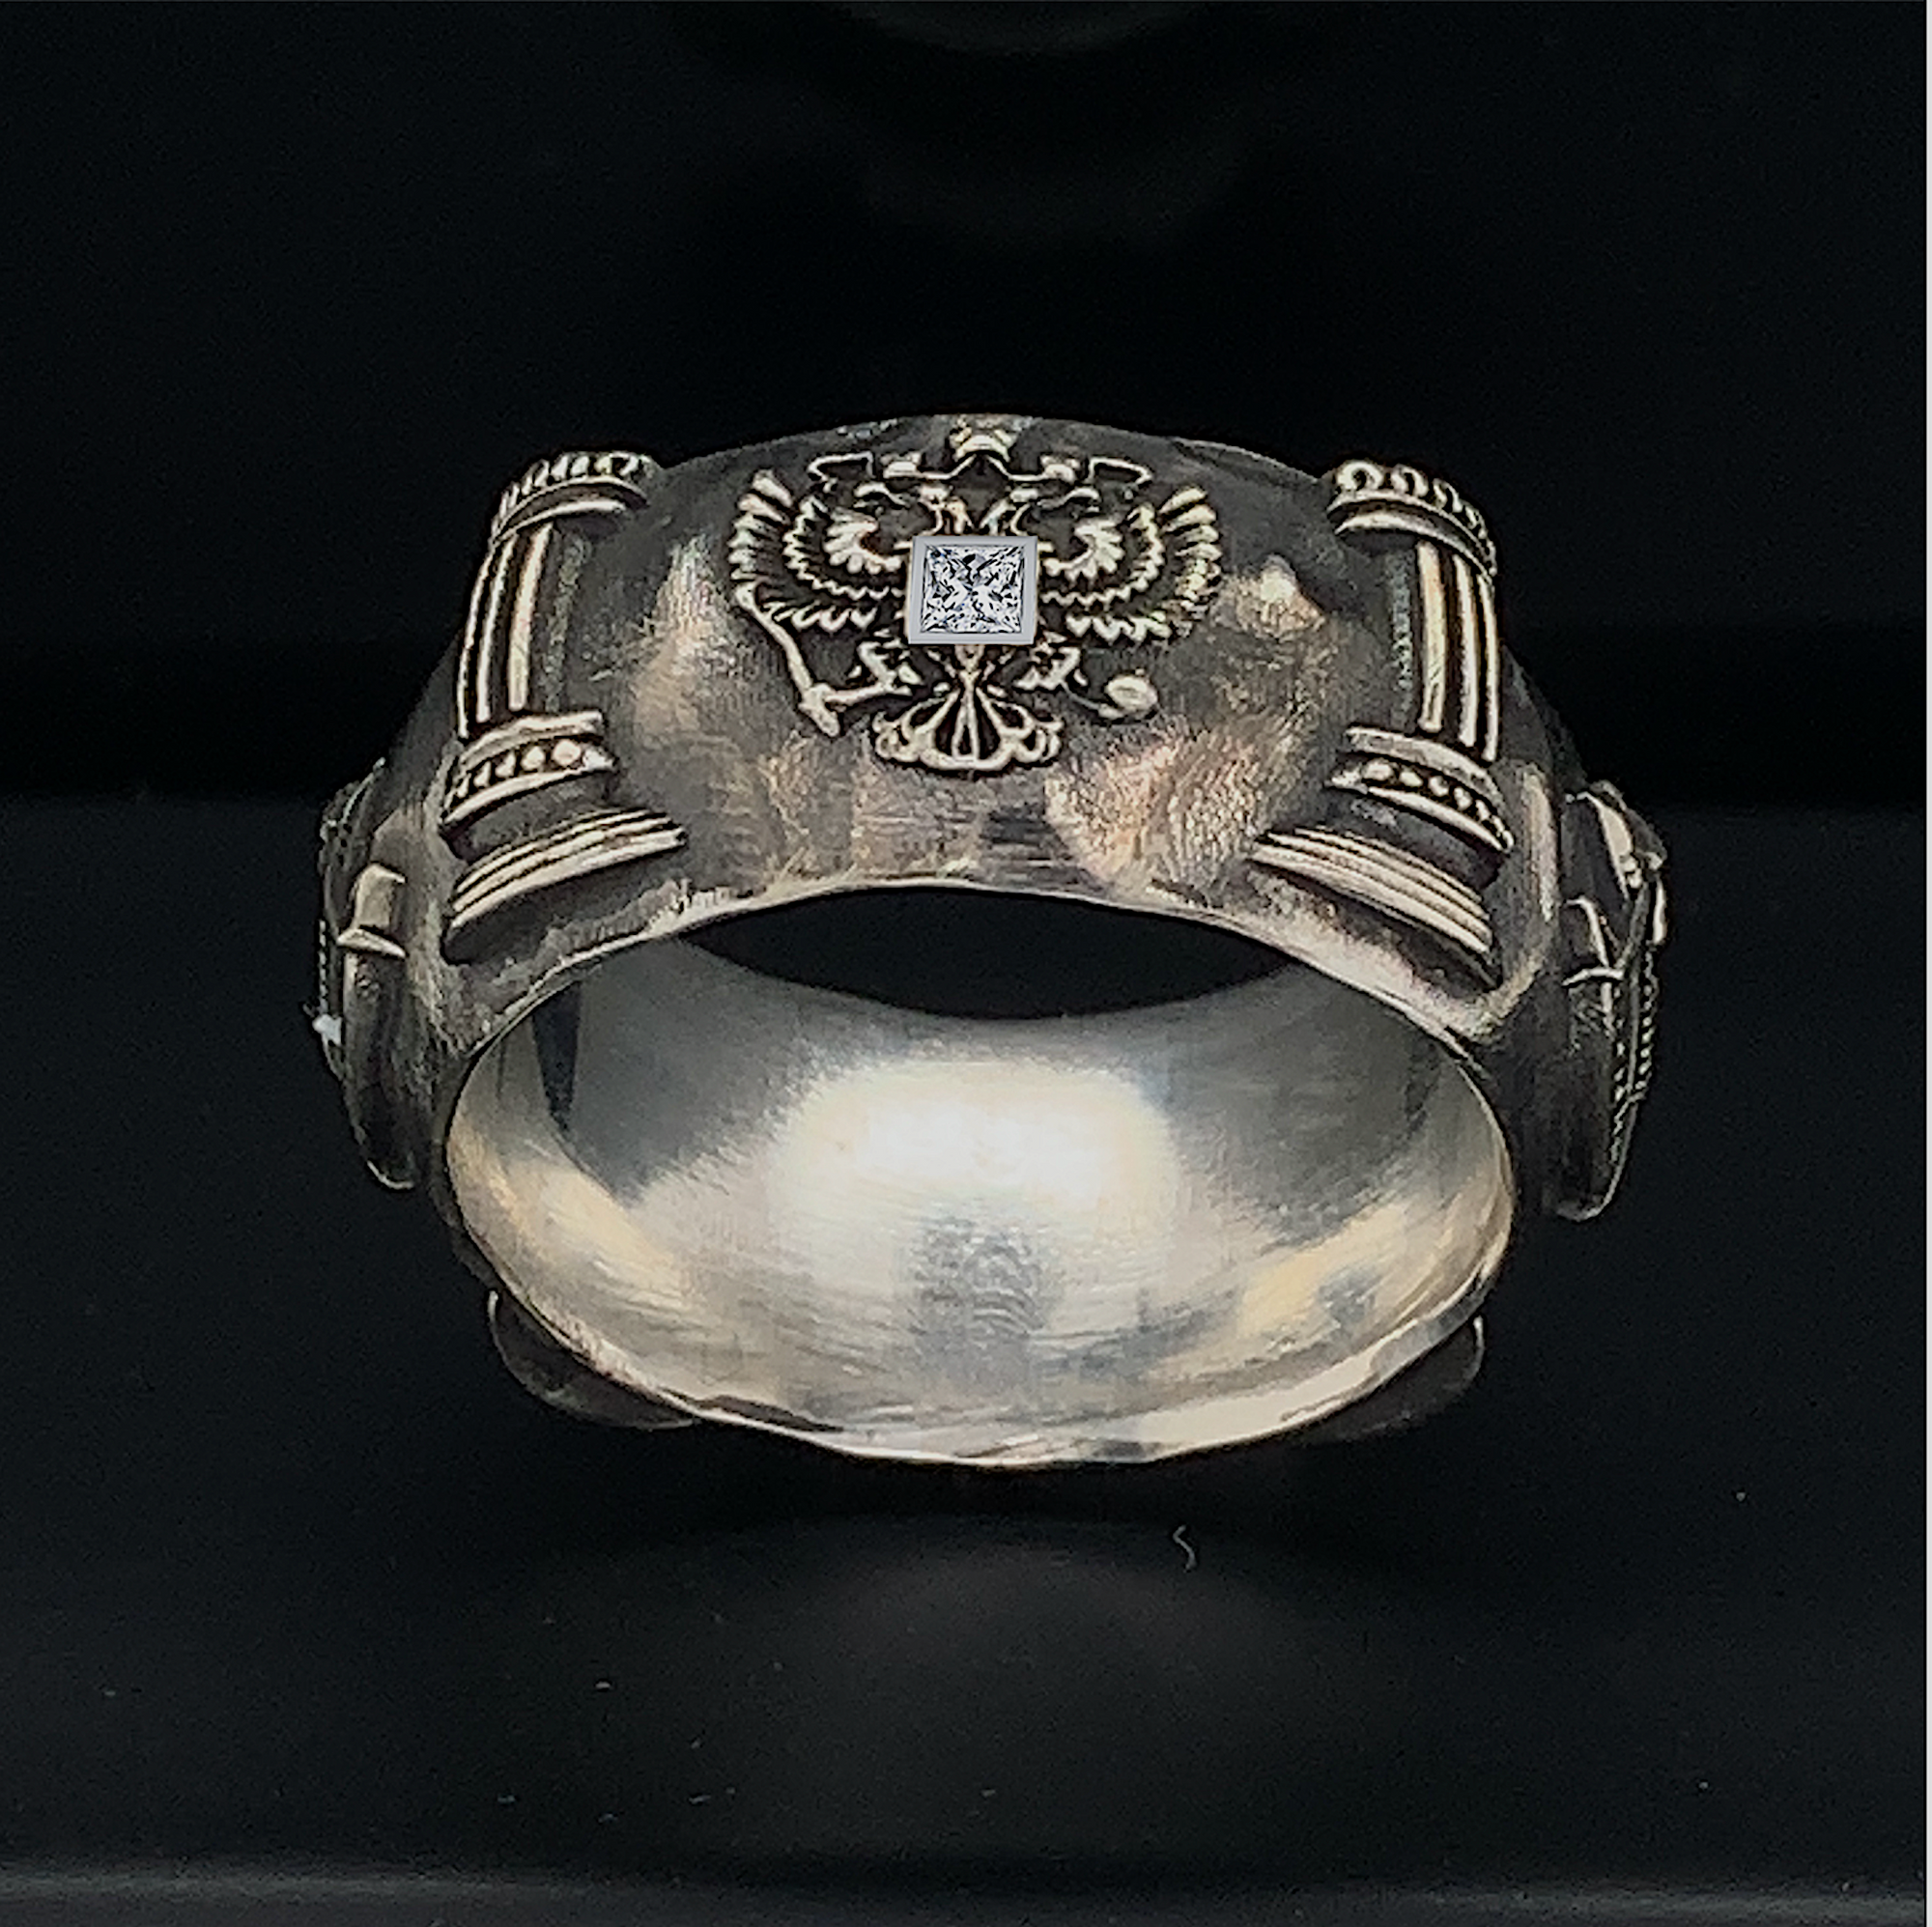 Handmade Diamond Masonic Ring with Square and Compass Two Headed Eagle